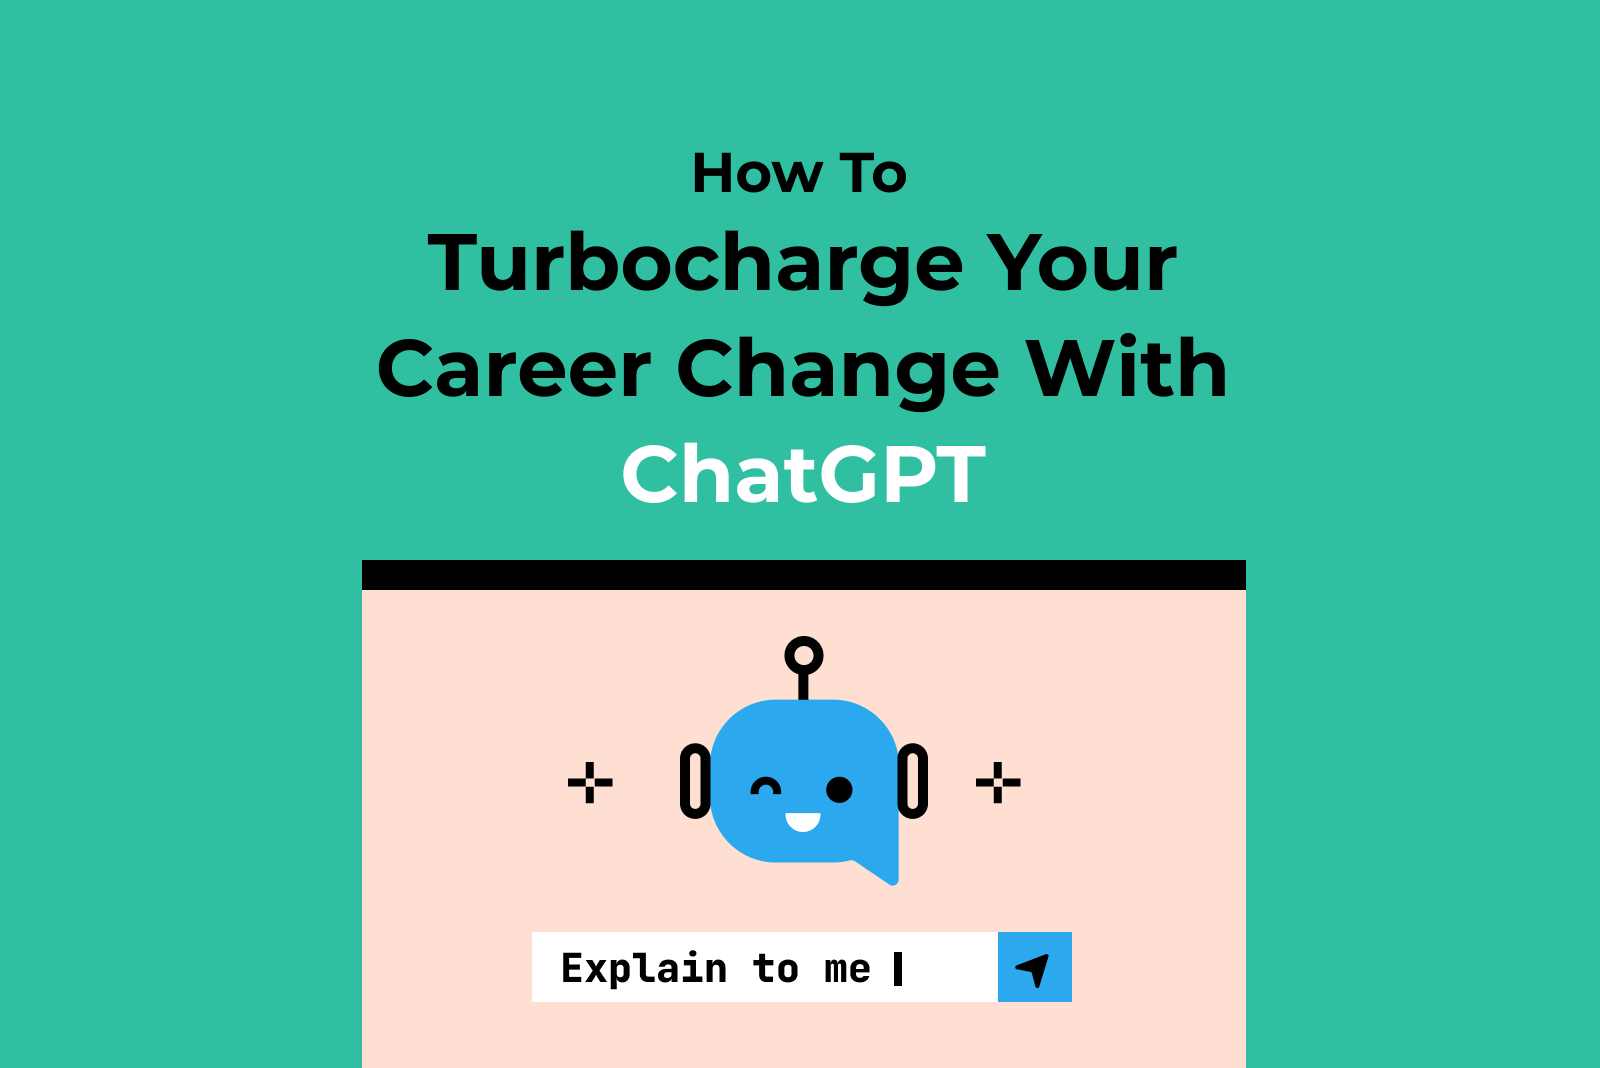 An illustration of the ChatGPT interface with the text "How to Turbocharge Your Career Change with ChatGPT"